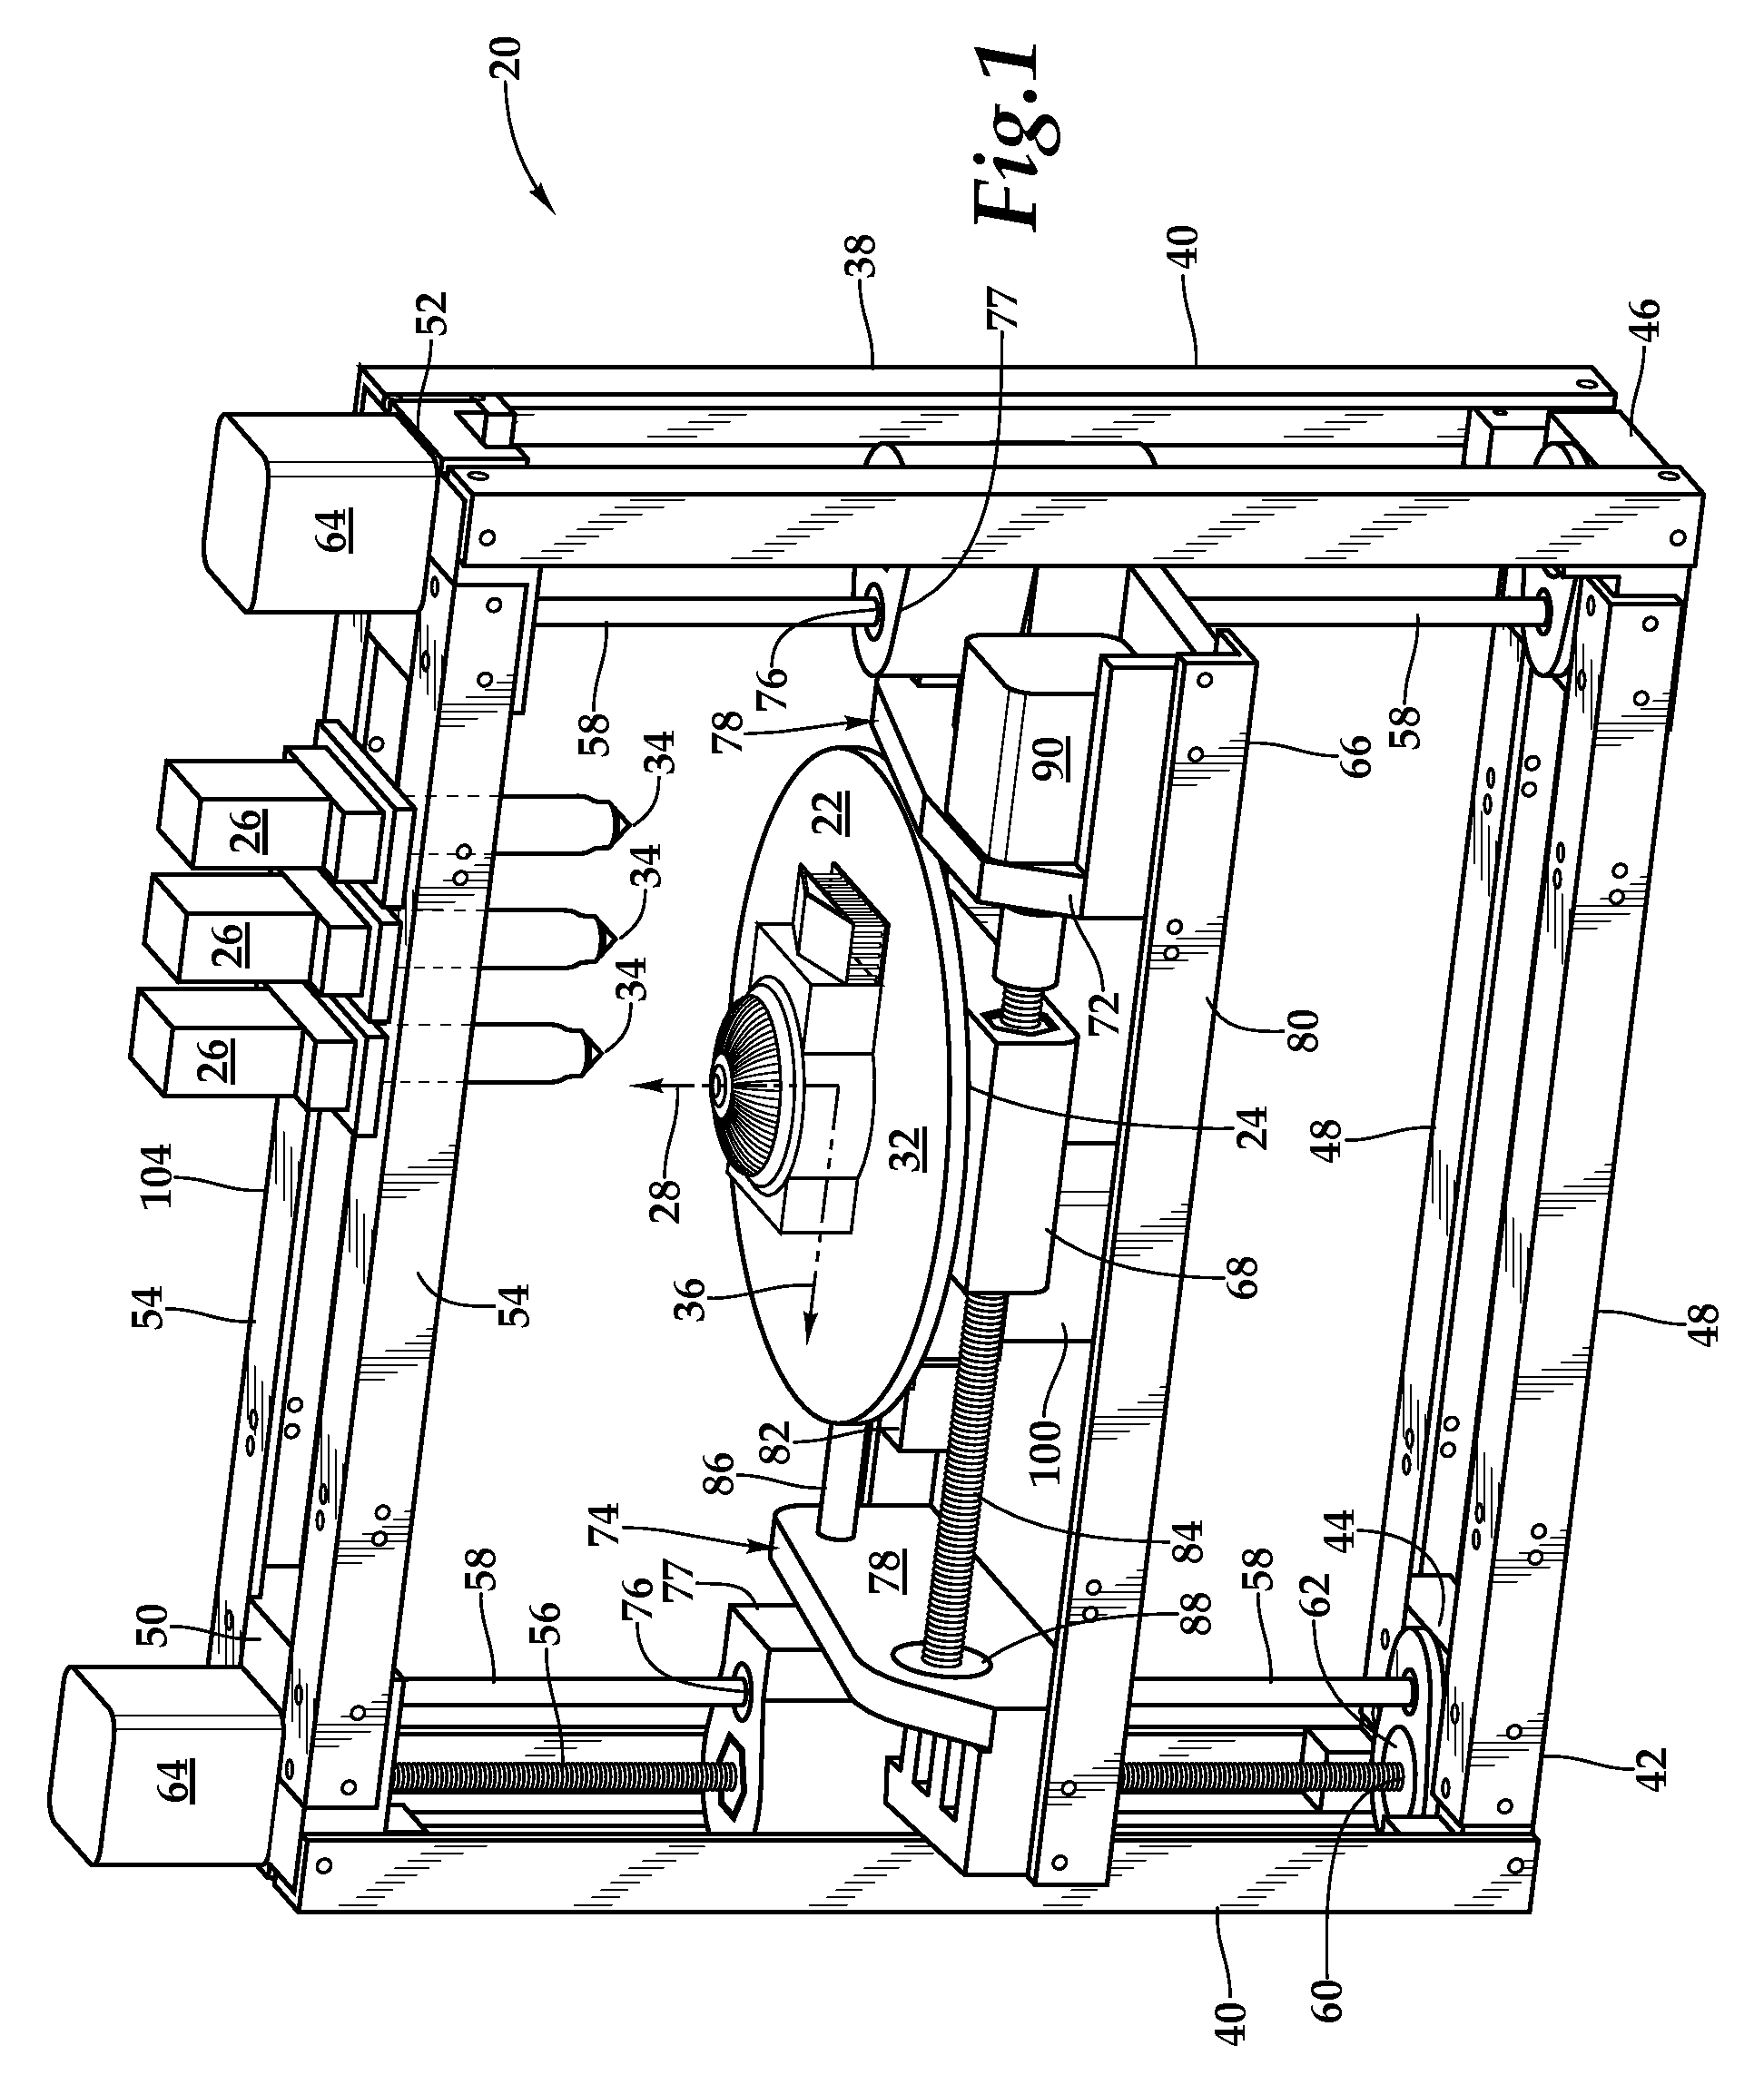 Fixed printhead fused filament fabrication printer and method